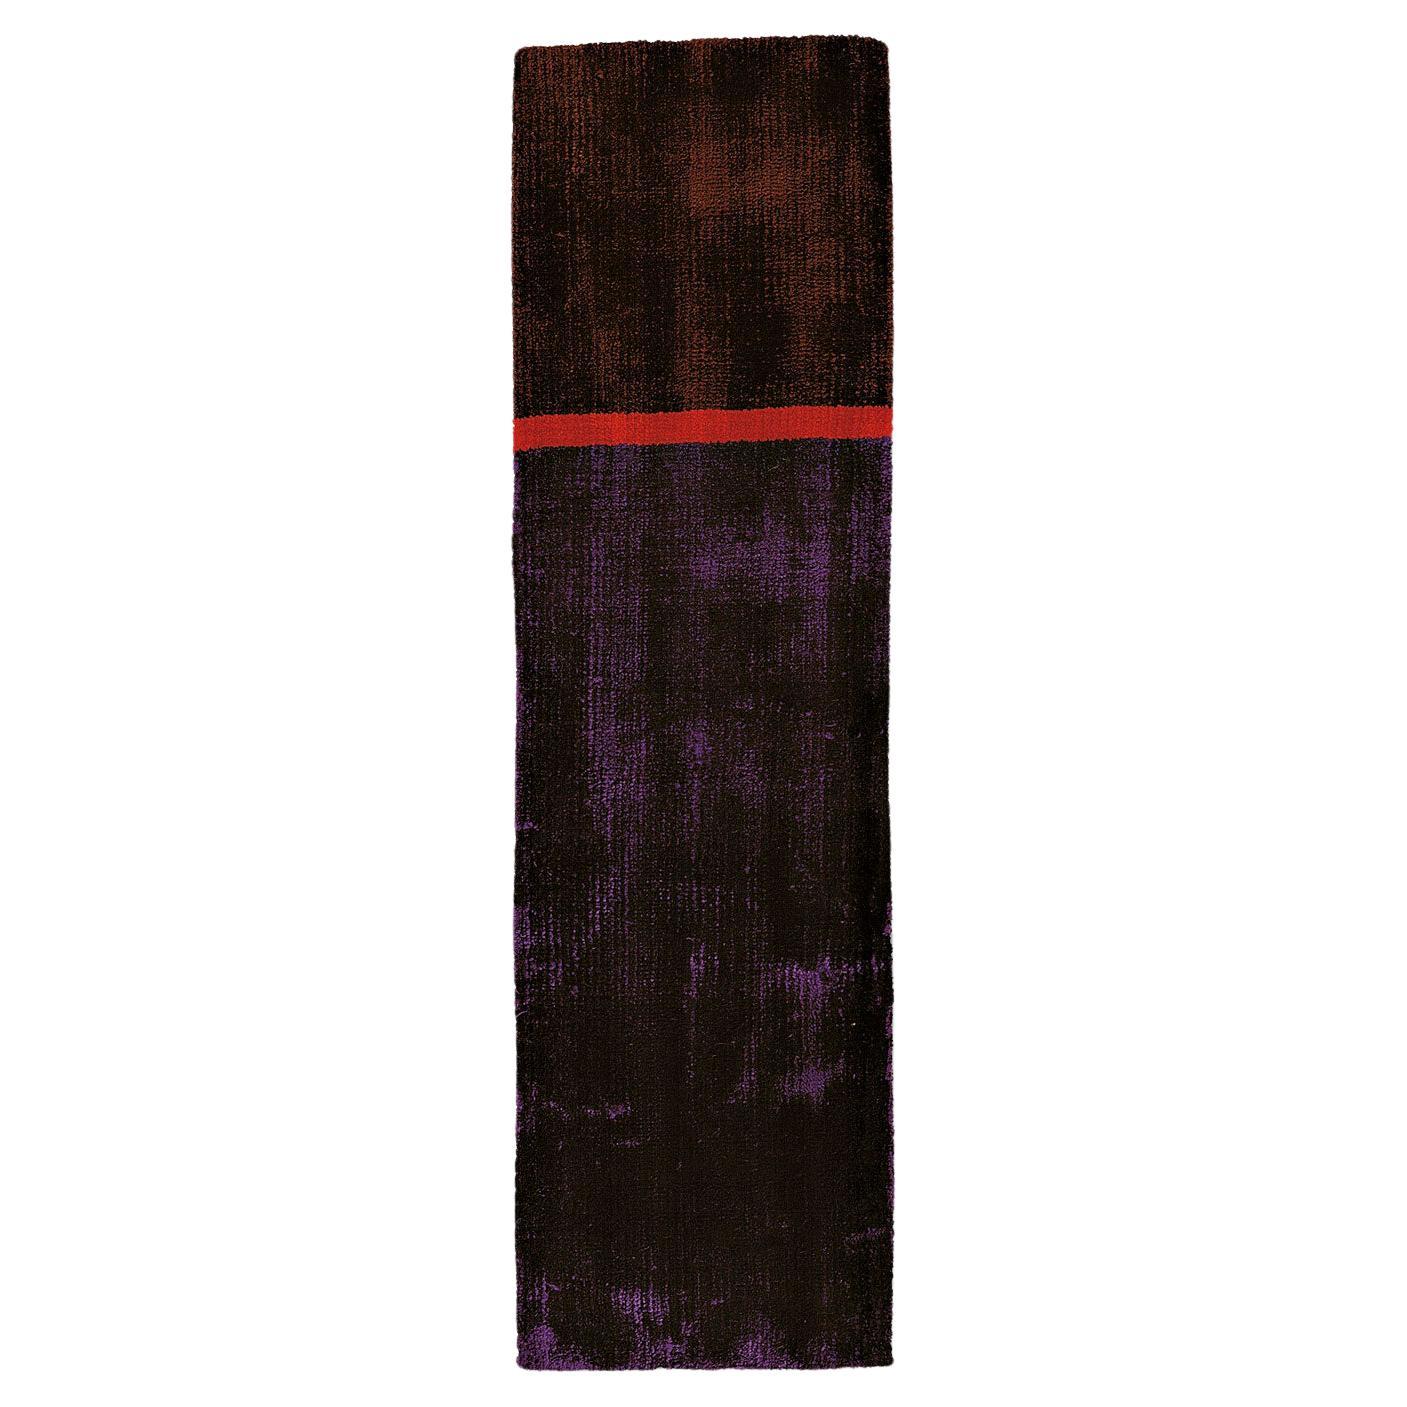 21st Cent Shiny Violet Brown Runner Rug by Deanna Comellini In Stock 60x200cm